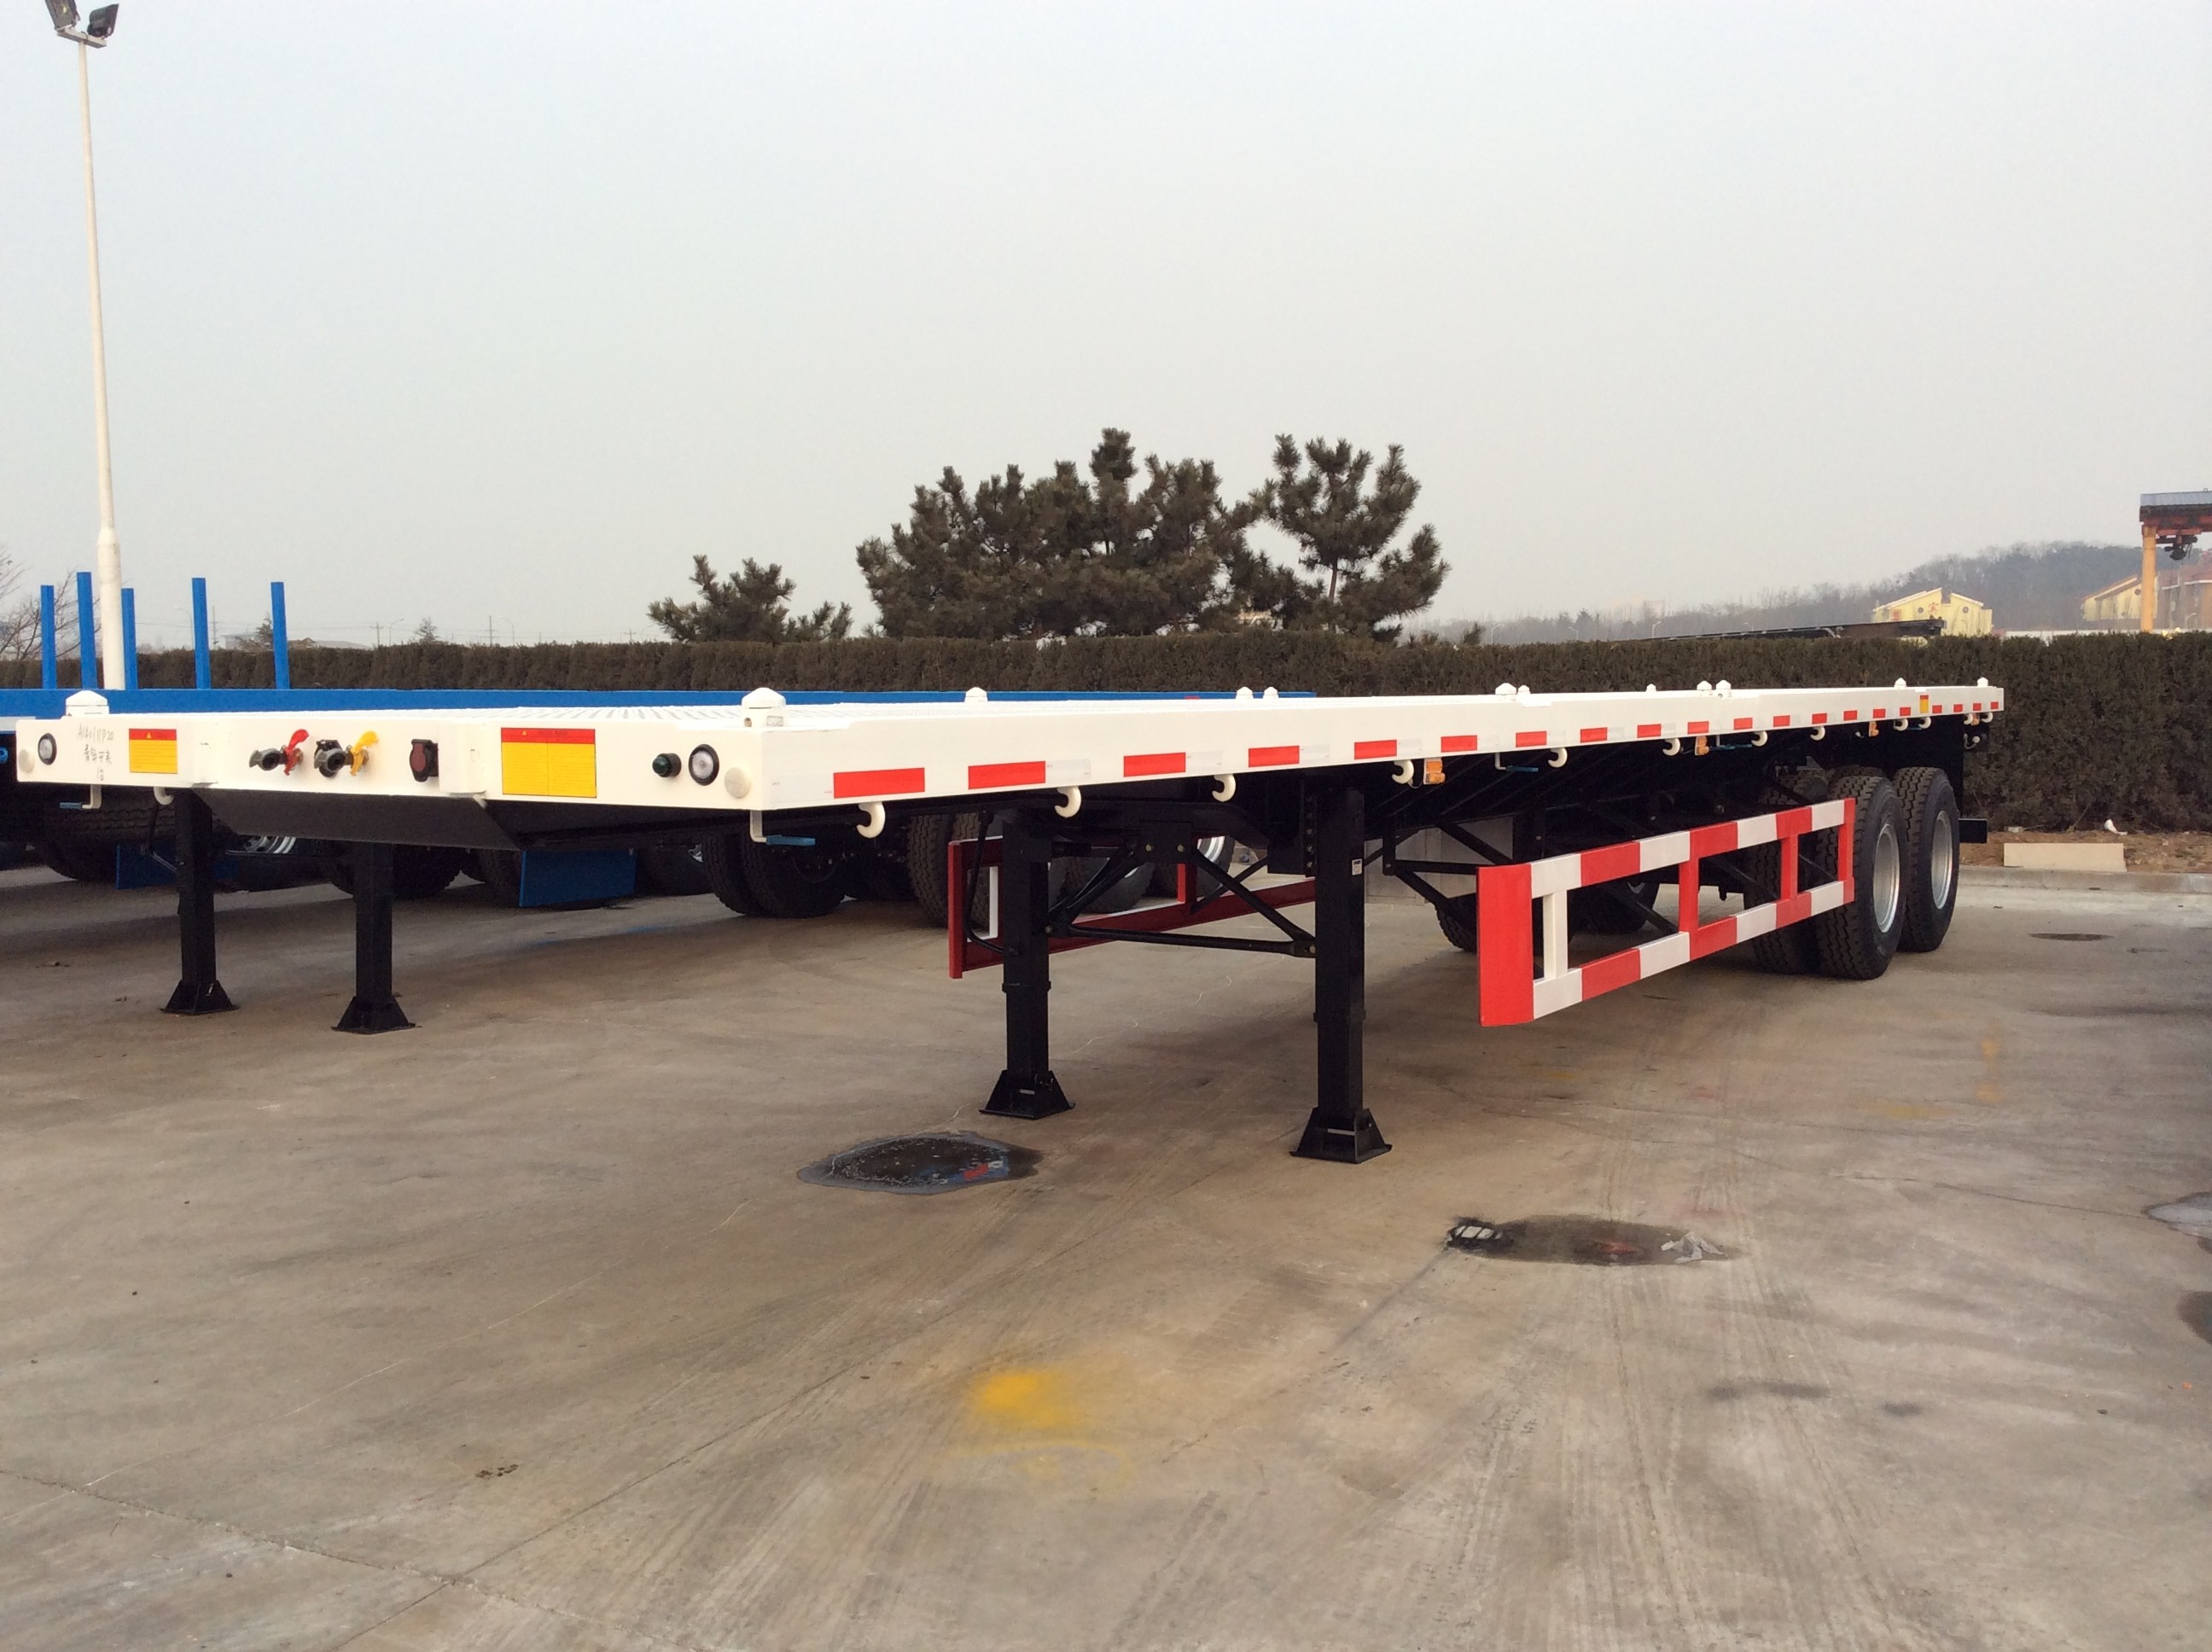 China Flat Bed Semi Trailer,cimc vehicles,Container trailers,skeleton,china manufacturer,terminal trailer, CIMC TRAILER, wholesale